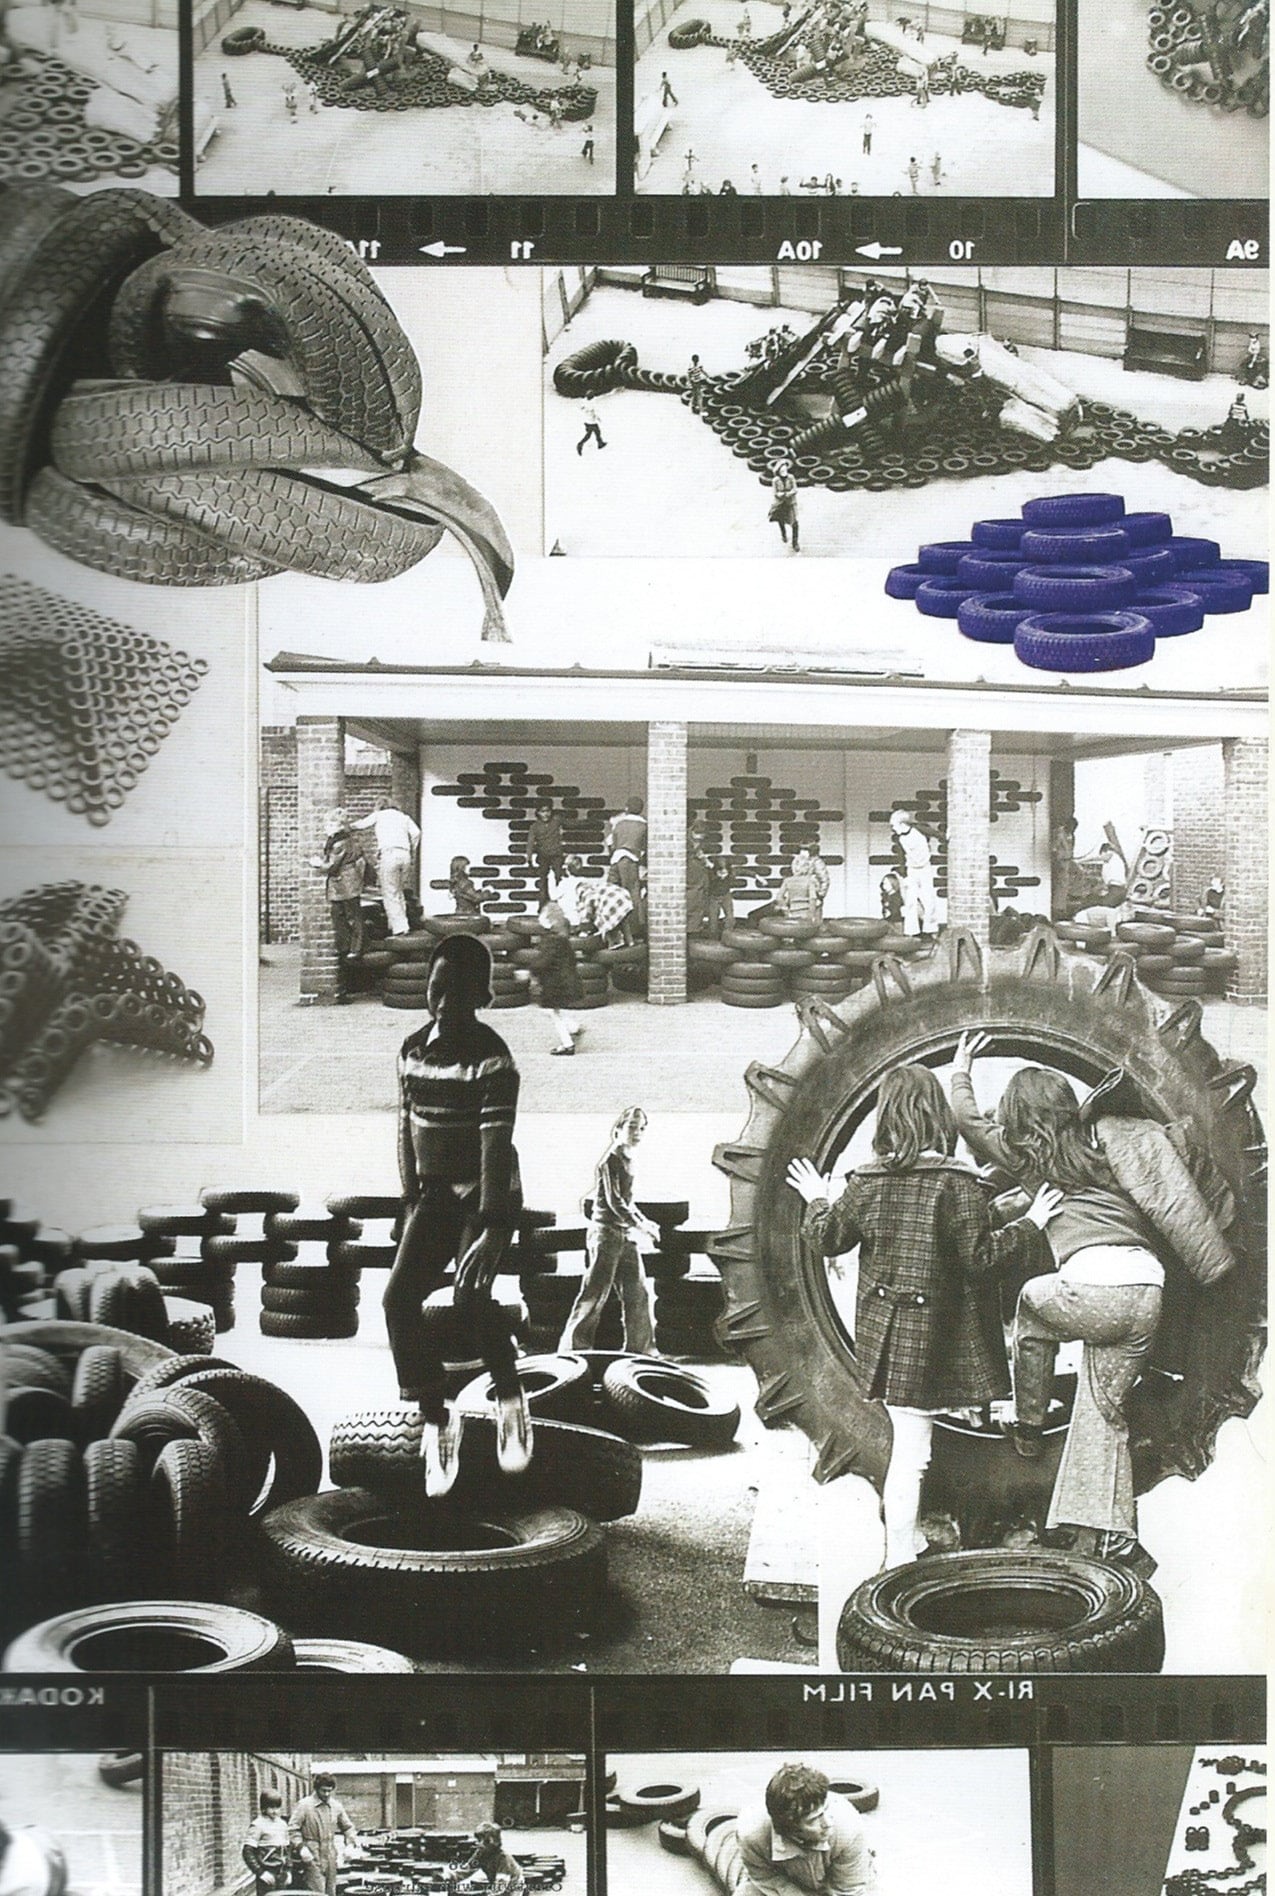 A collage from the Islington Schools Environmental Project, the work of Roger Fagin and David Cashman at Laycock School, UK, 1978